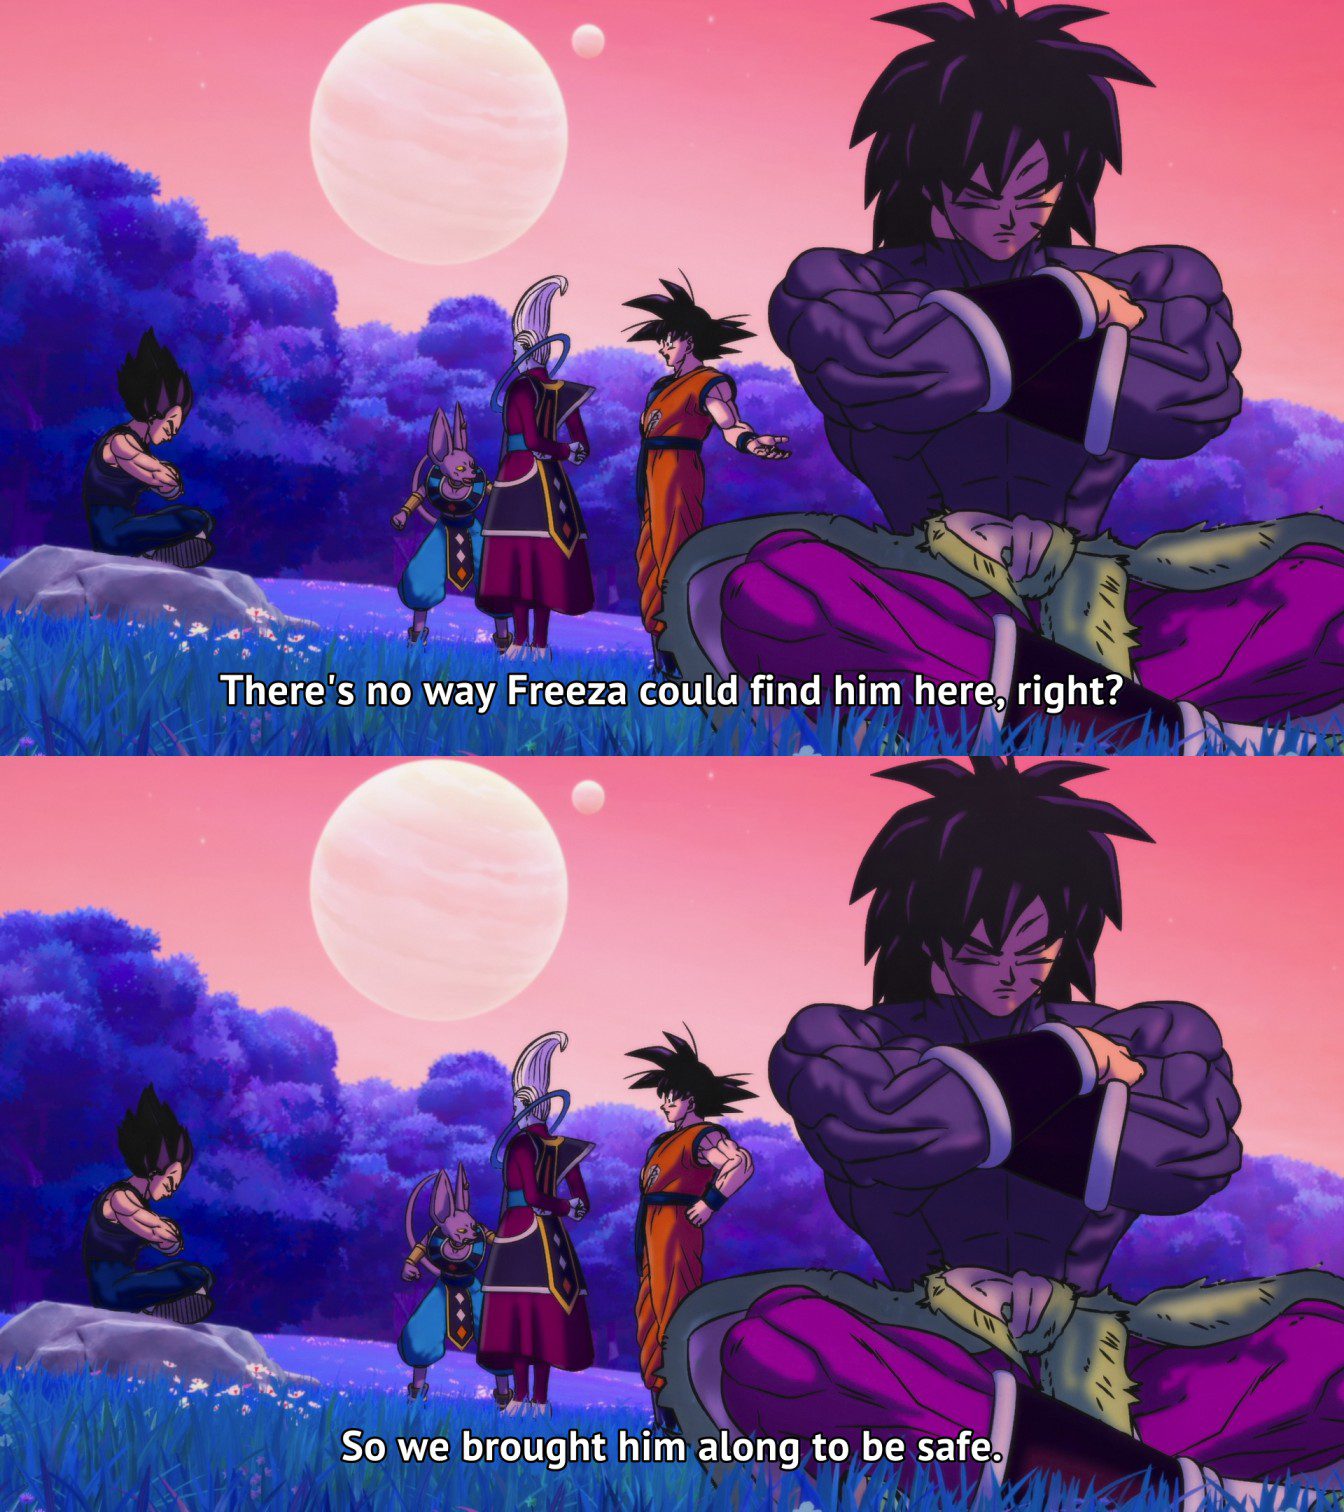 Broly on Beerus' planet to keep him from a safe distance from Frieza